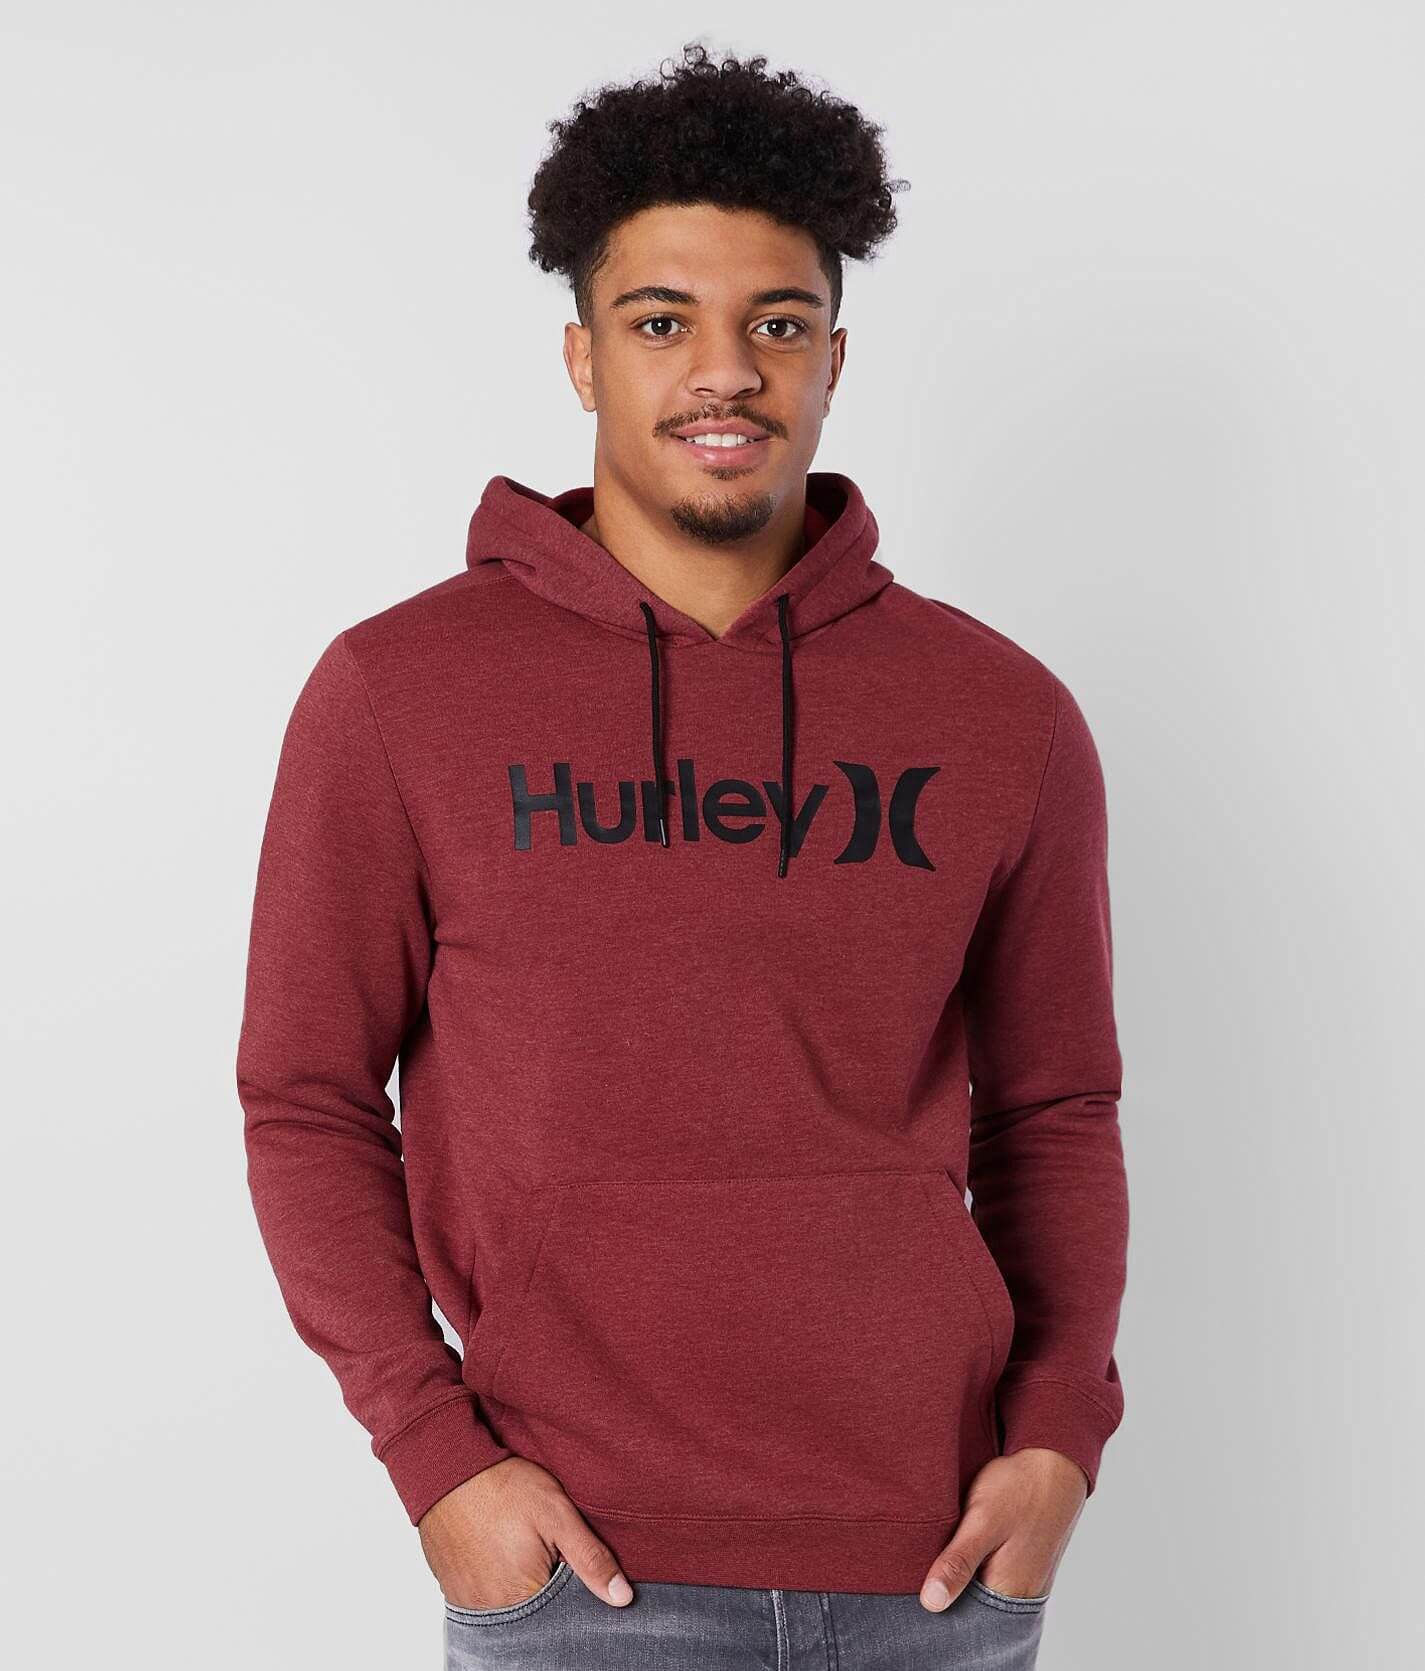 Hurley Surf Check One and Only Pullover Hoody 